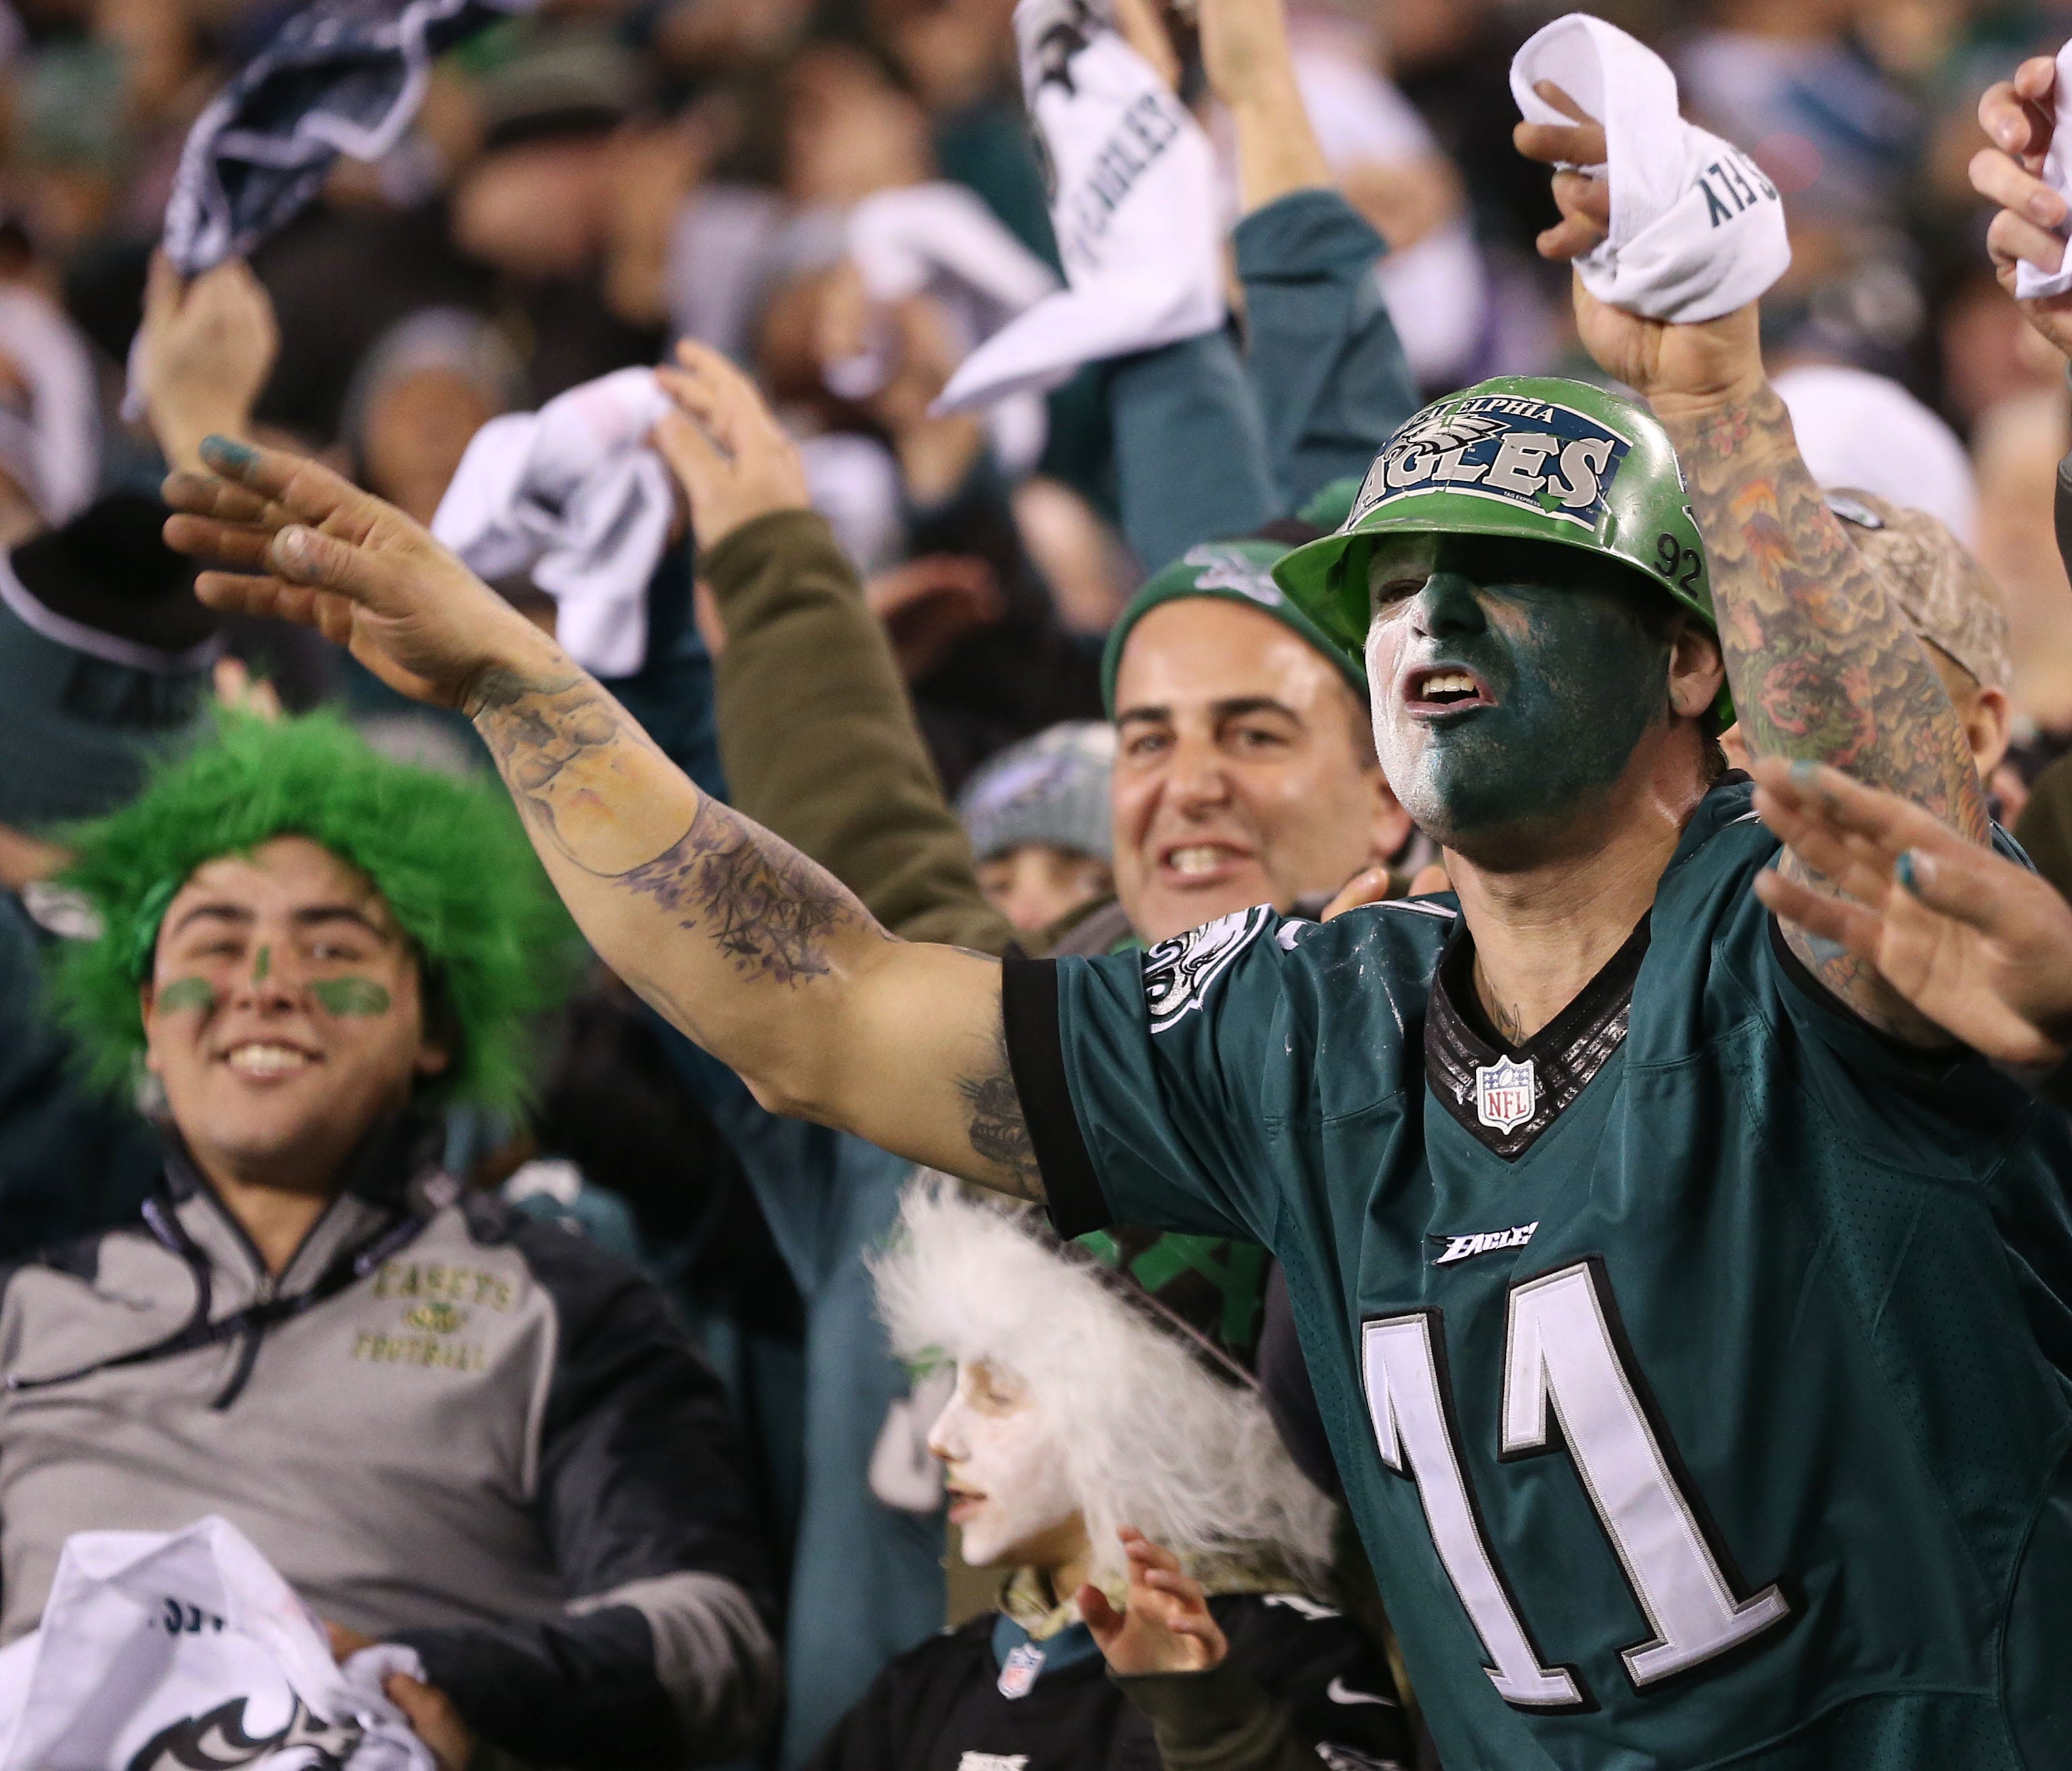 Jan 21, 2018; Philadelphia, PA, USA; Philadelphia Eagles fans cheer from the stands in the third quarter during the NFC Championship game against the Minnesota Vikings at Lincoln Financial Field. Mandatory Credit: Bill Streicher-USA TODAY Sports ORG 